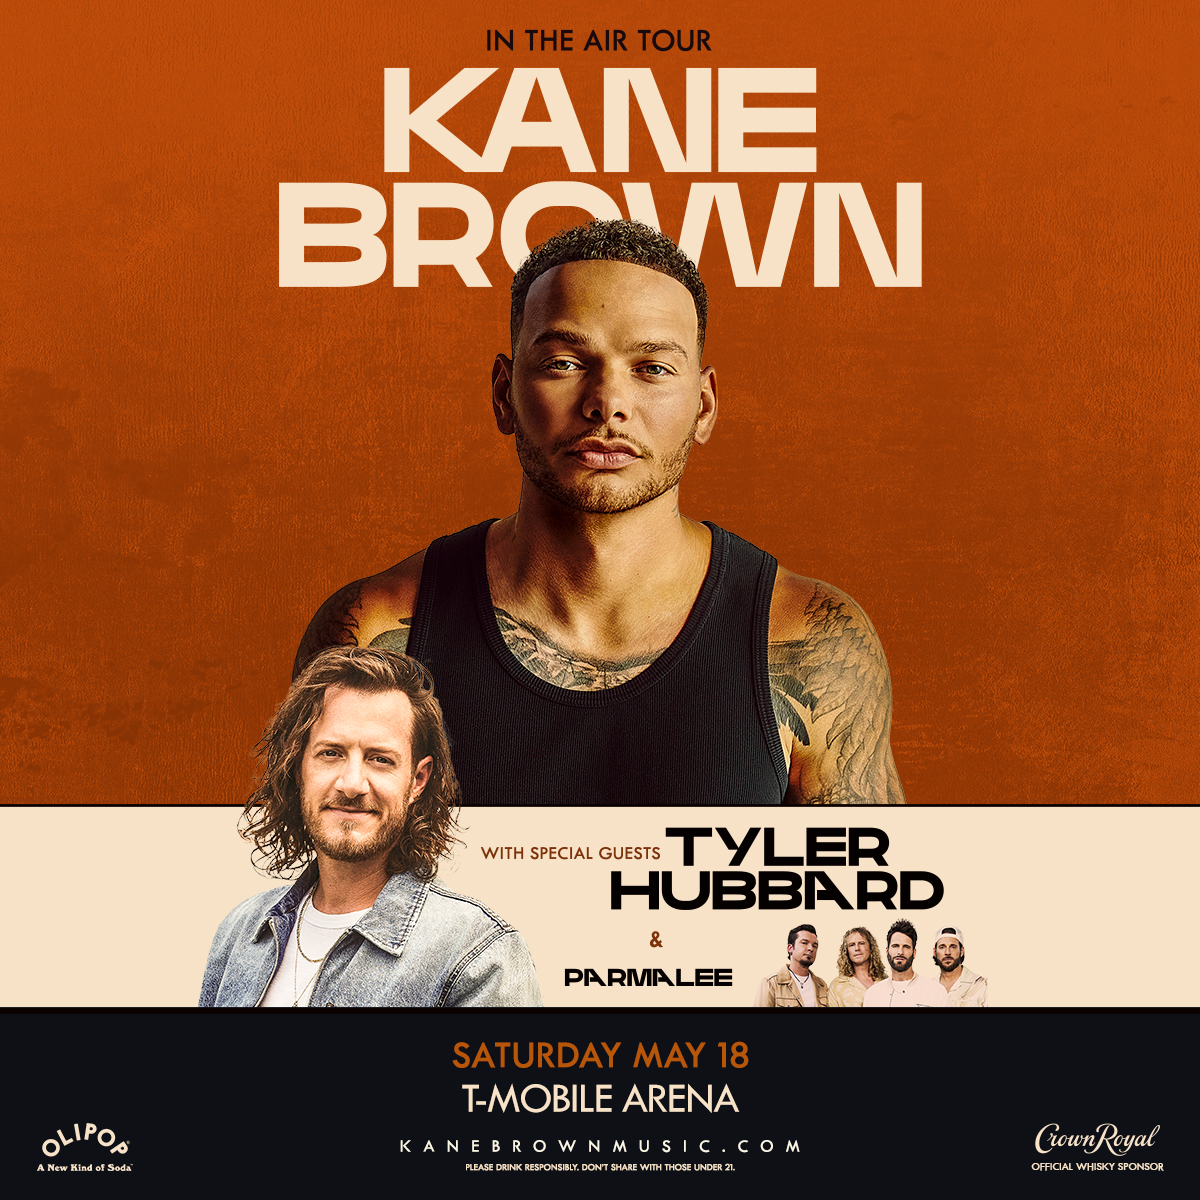 🟠 KANE BROWN 🟠 

We are a week out from @kanebrown's 'In The Air' tour in Vegas! Don't miss one of country's hottest singers with special guests @tylerhubbard and @parmalee on Saturday, May 18th. Get your tickets today! 

🎟️ ➡️ spr.ly/6016wX2H4